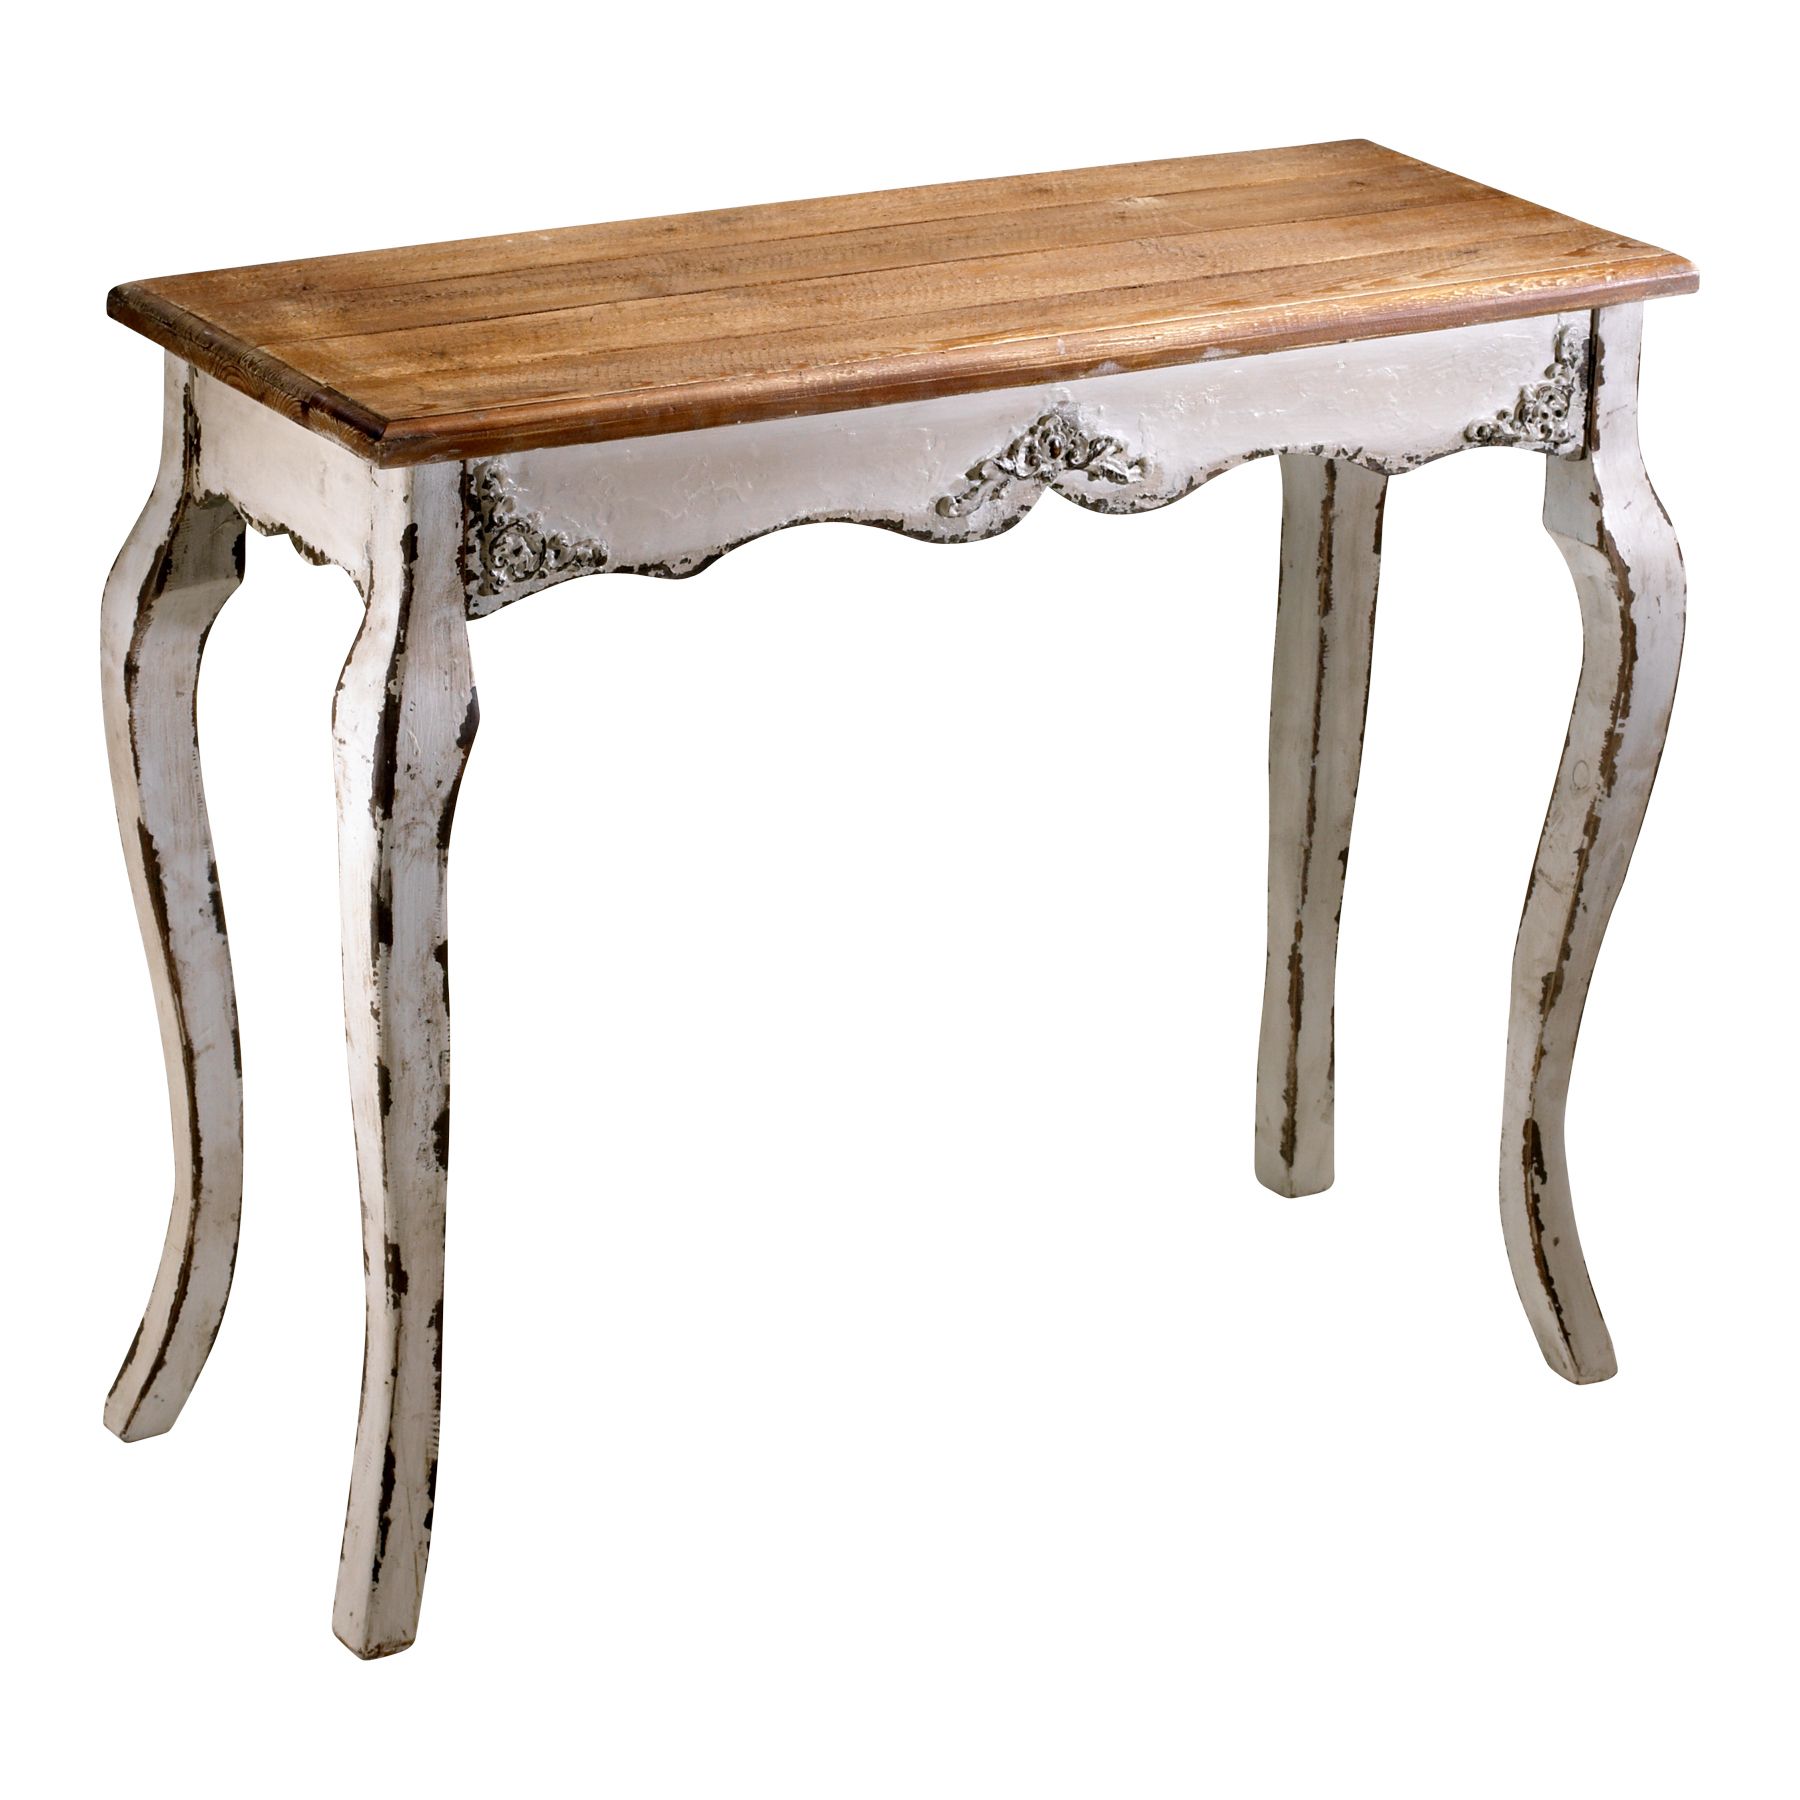 Distressed Console Tables All About House Design Best Bluestone Pertaining To Bluestone Console Tables (View 17 of 30)